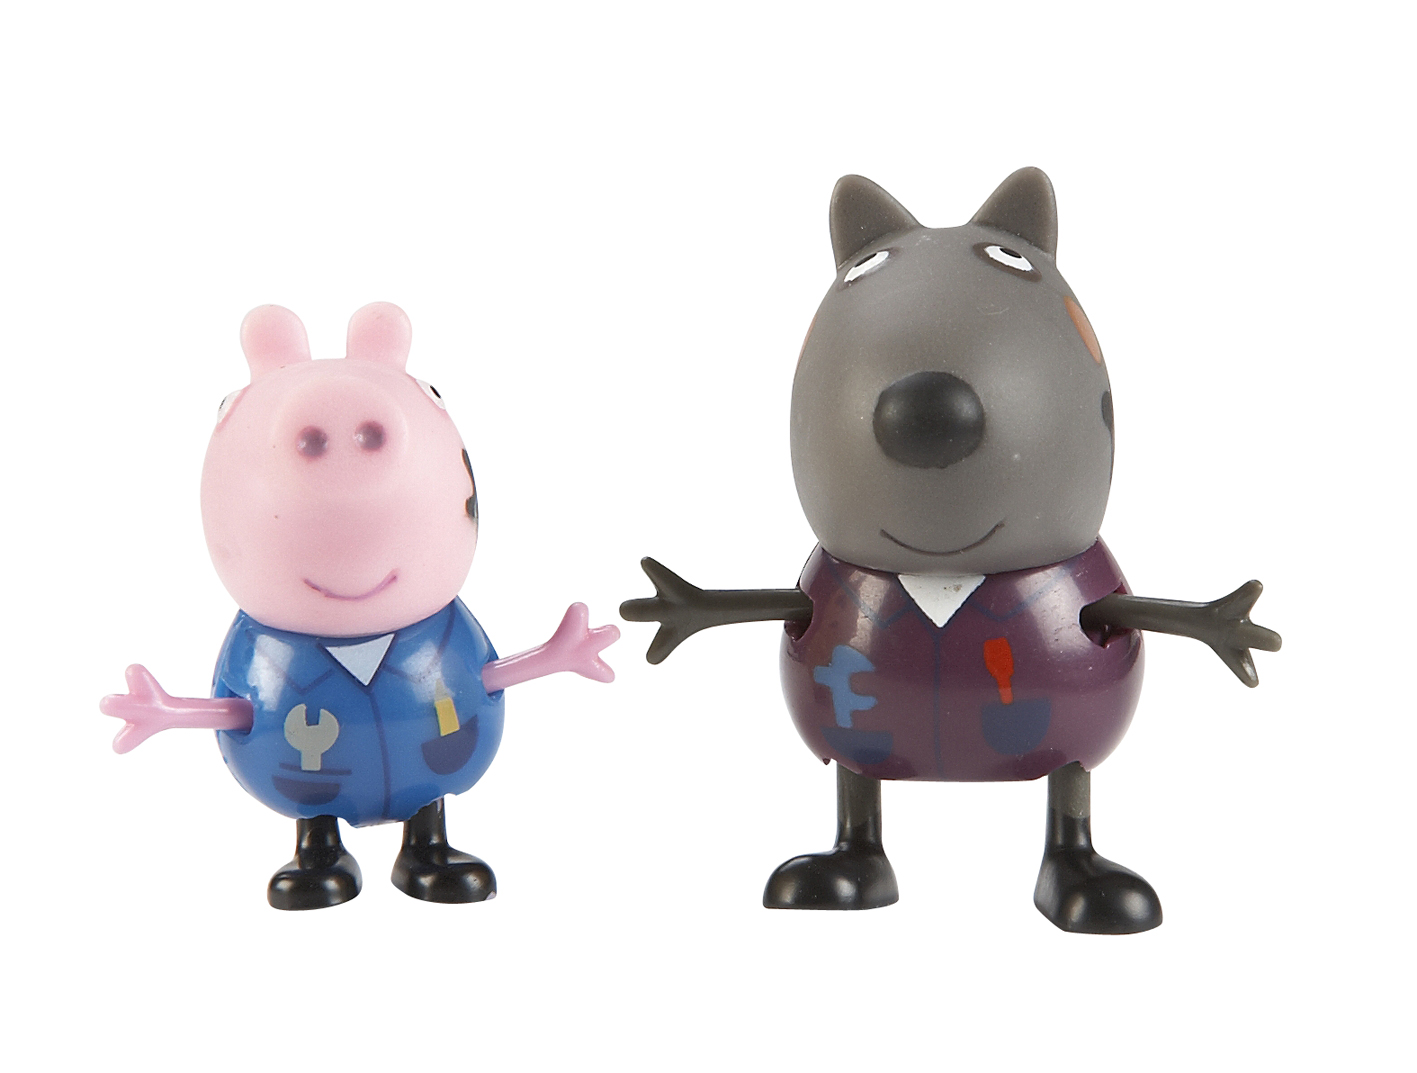 Peppa Pig & Peppa Pig PEPPA PIG PRINCESS & SIR GEORGE TWIN FIGURE PACK NEW 